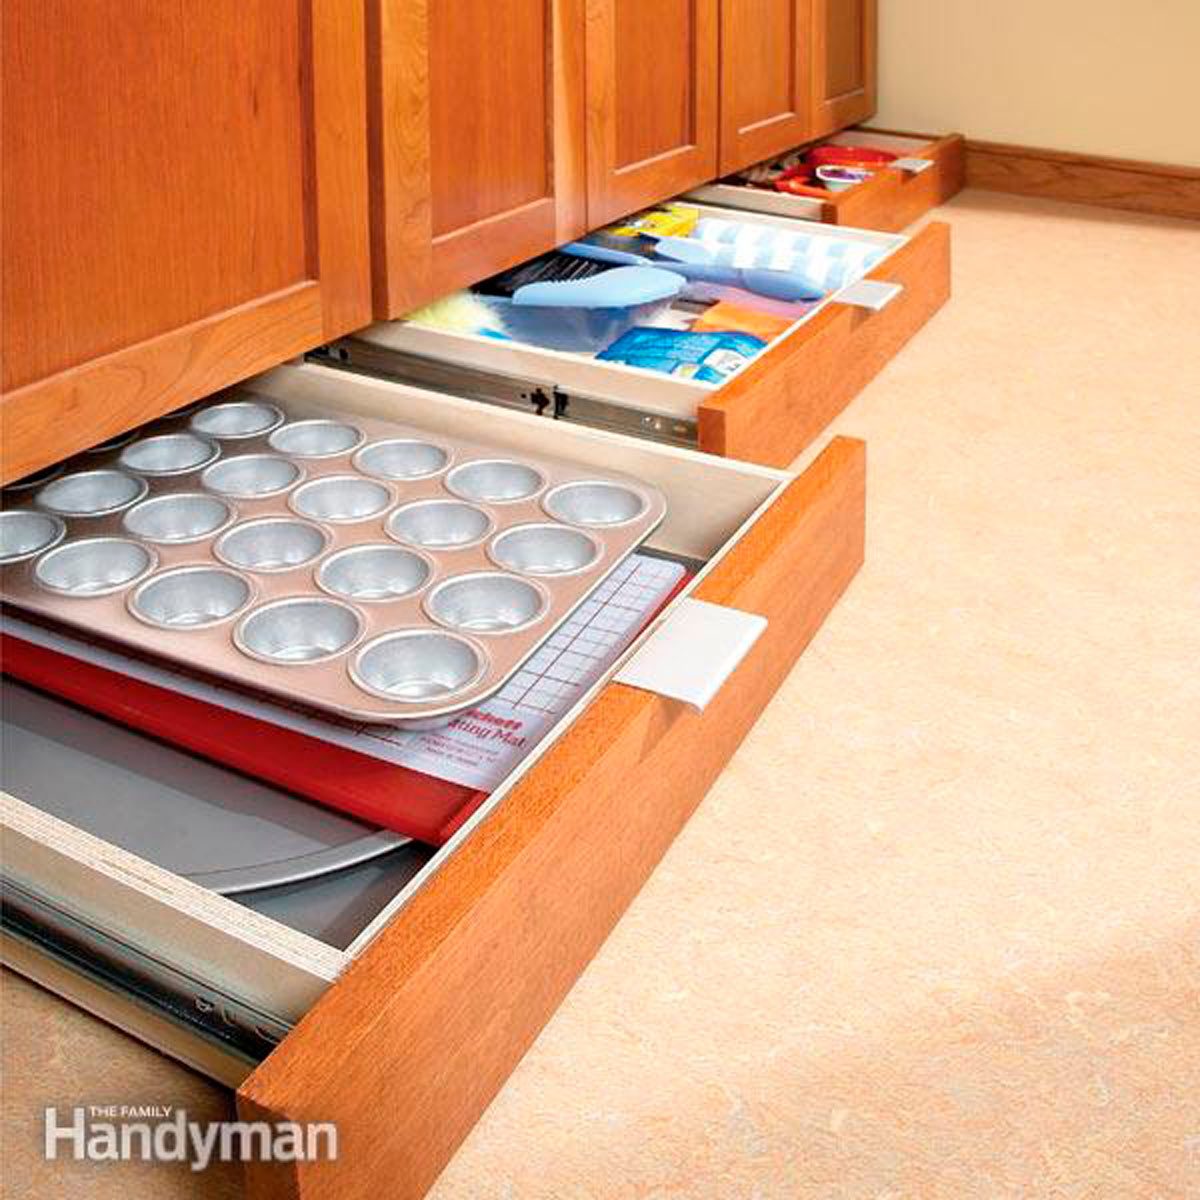 5 Life-Changing Cabinet Organization Accessories for Your Home